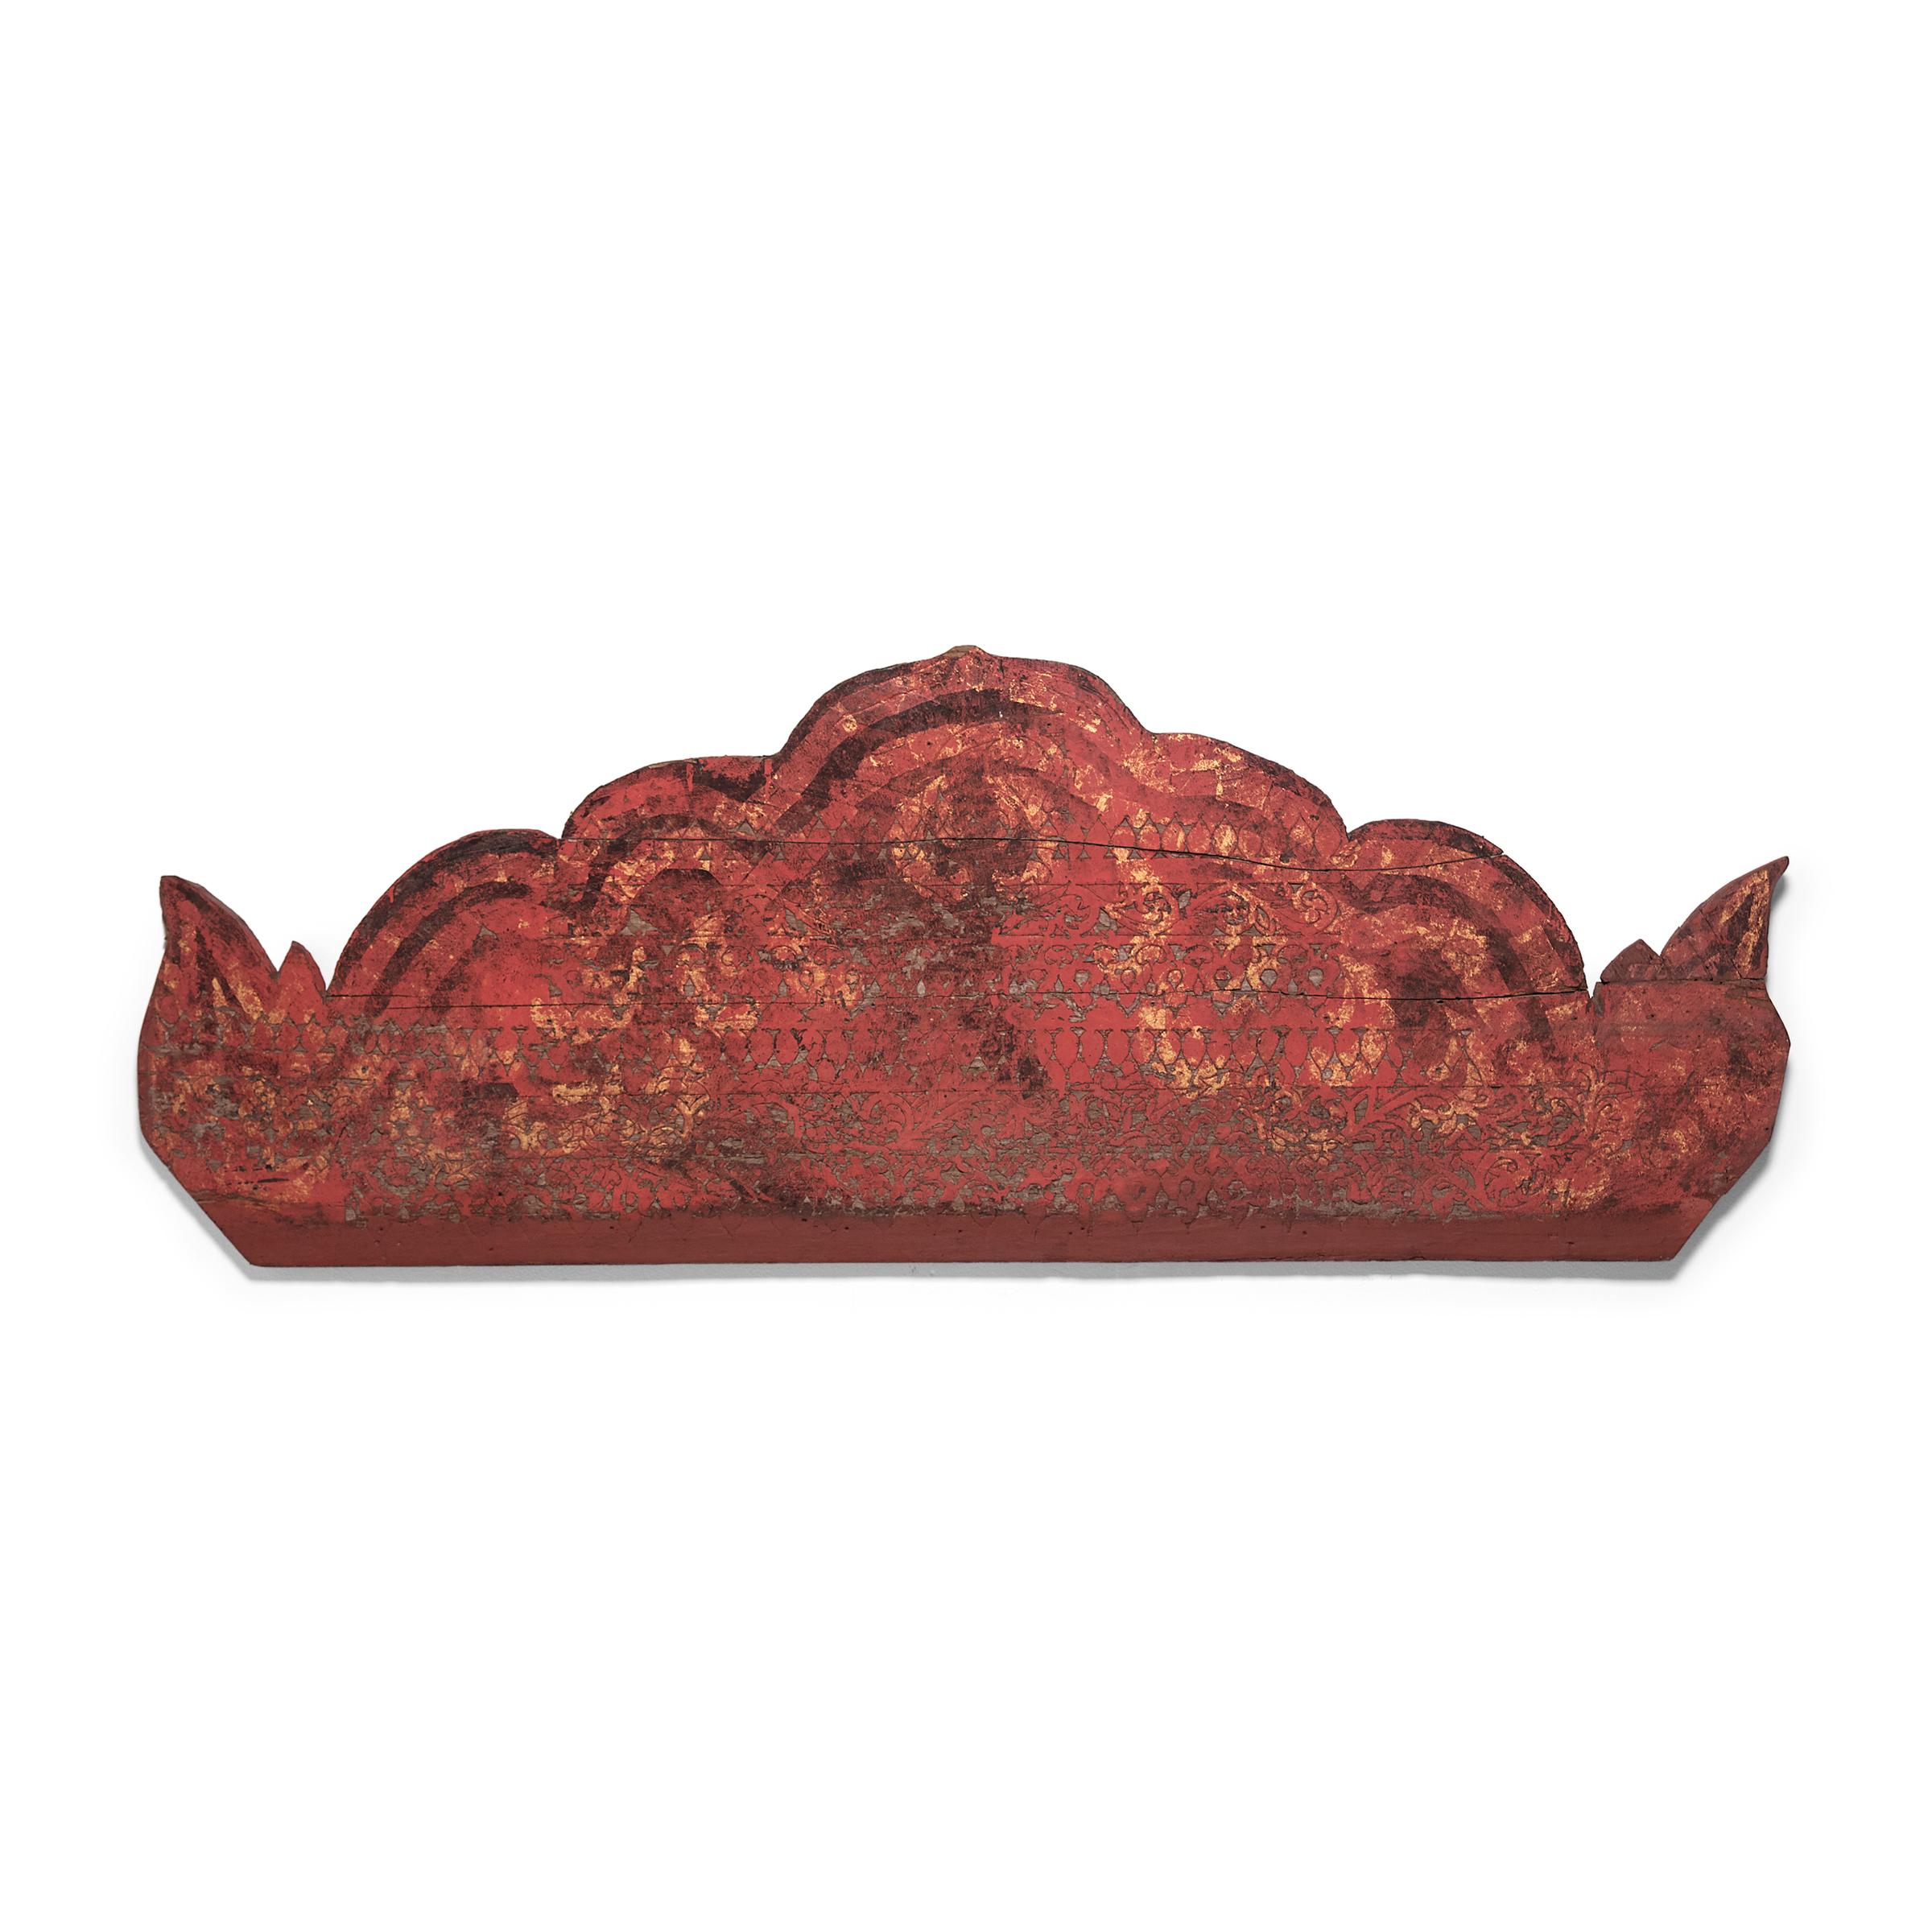 Red Lacquer Architectural Fragment, c. 1850 - Mixed Media Art by Unknown